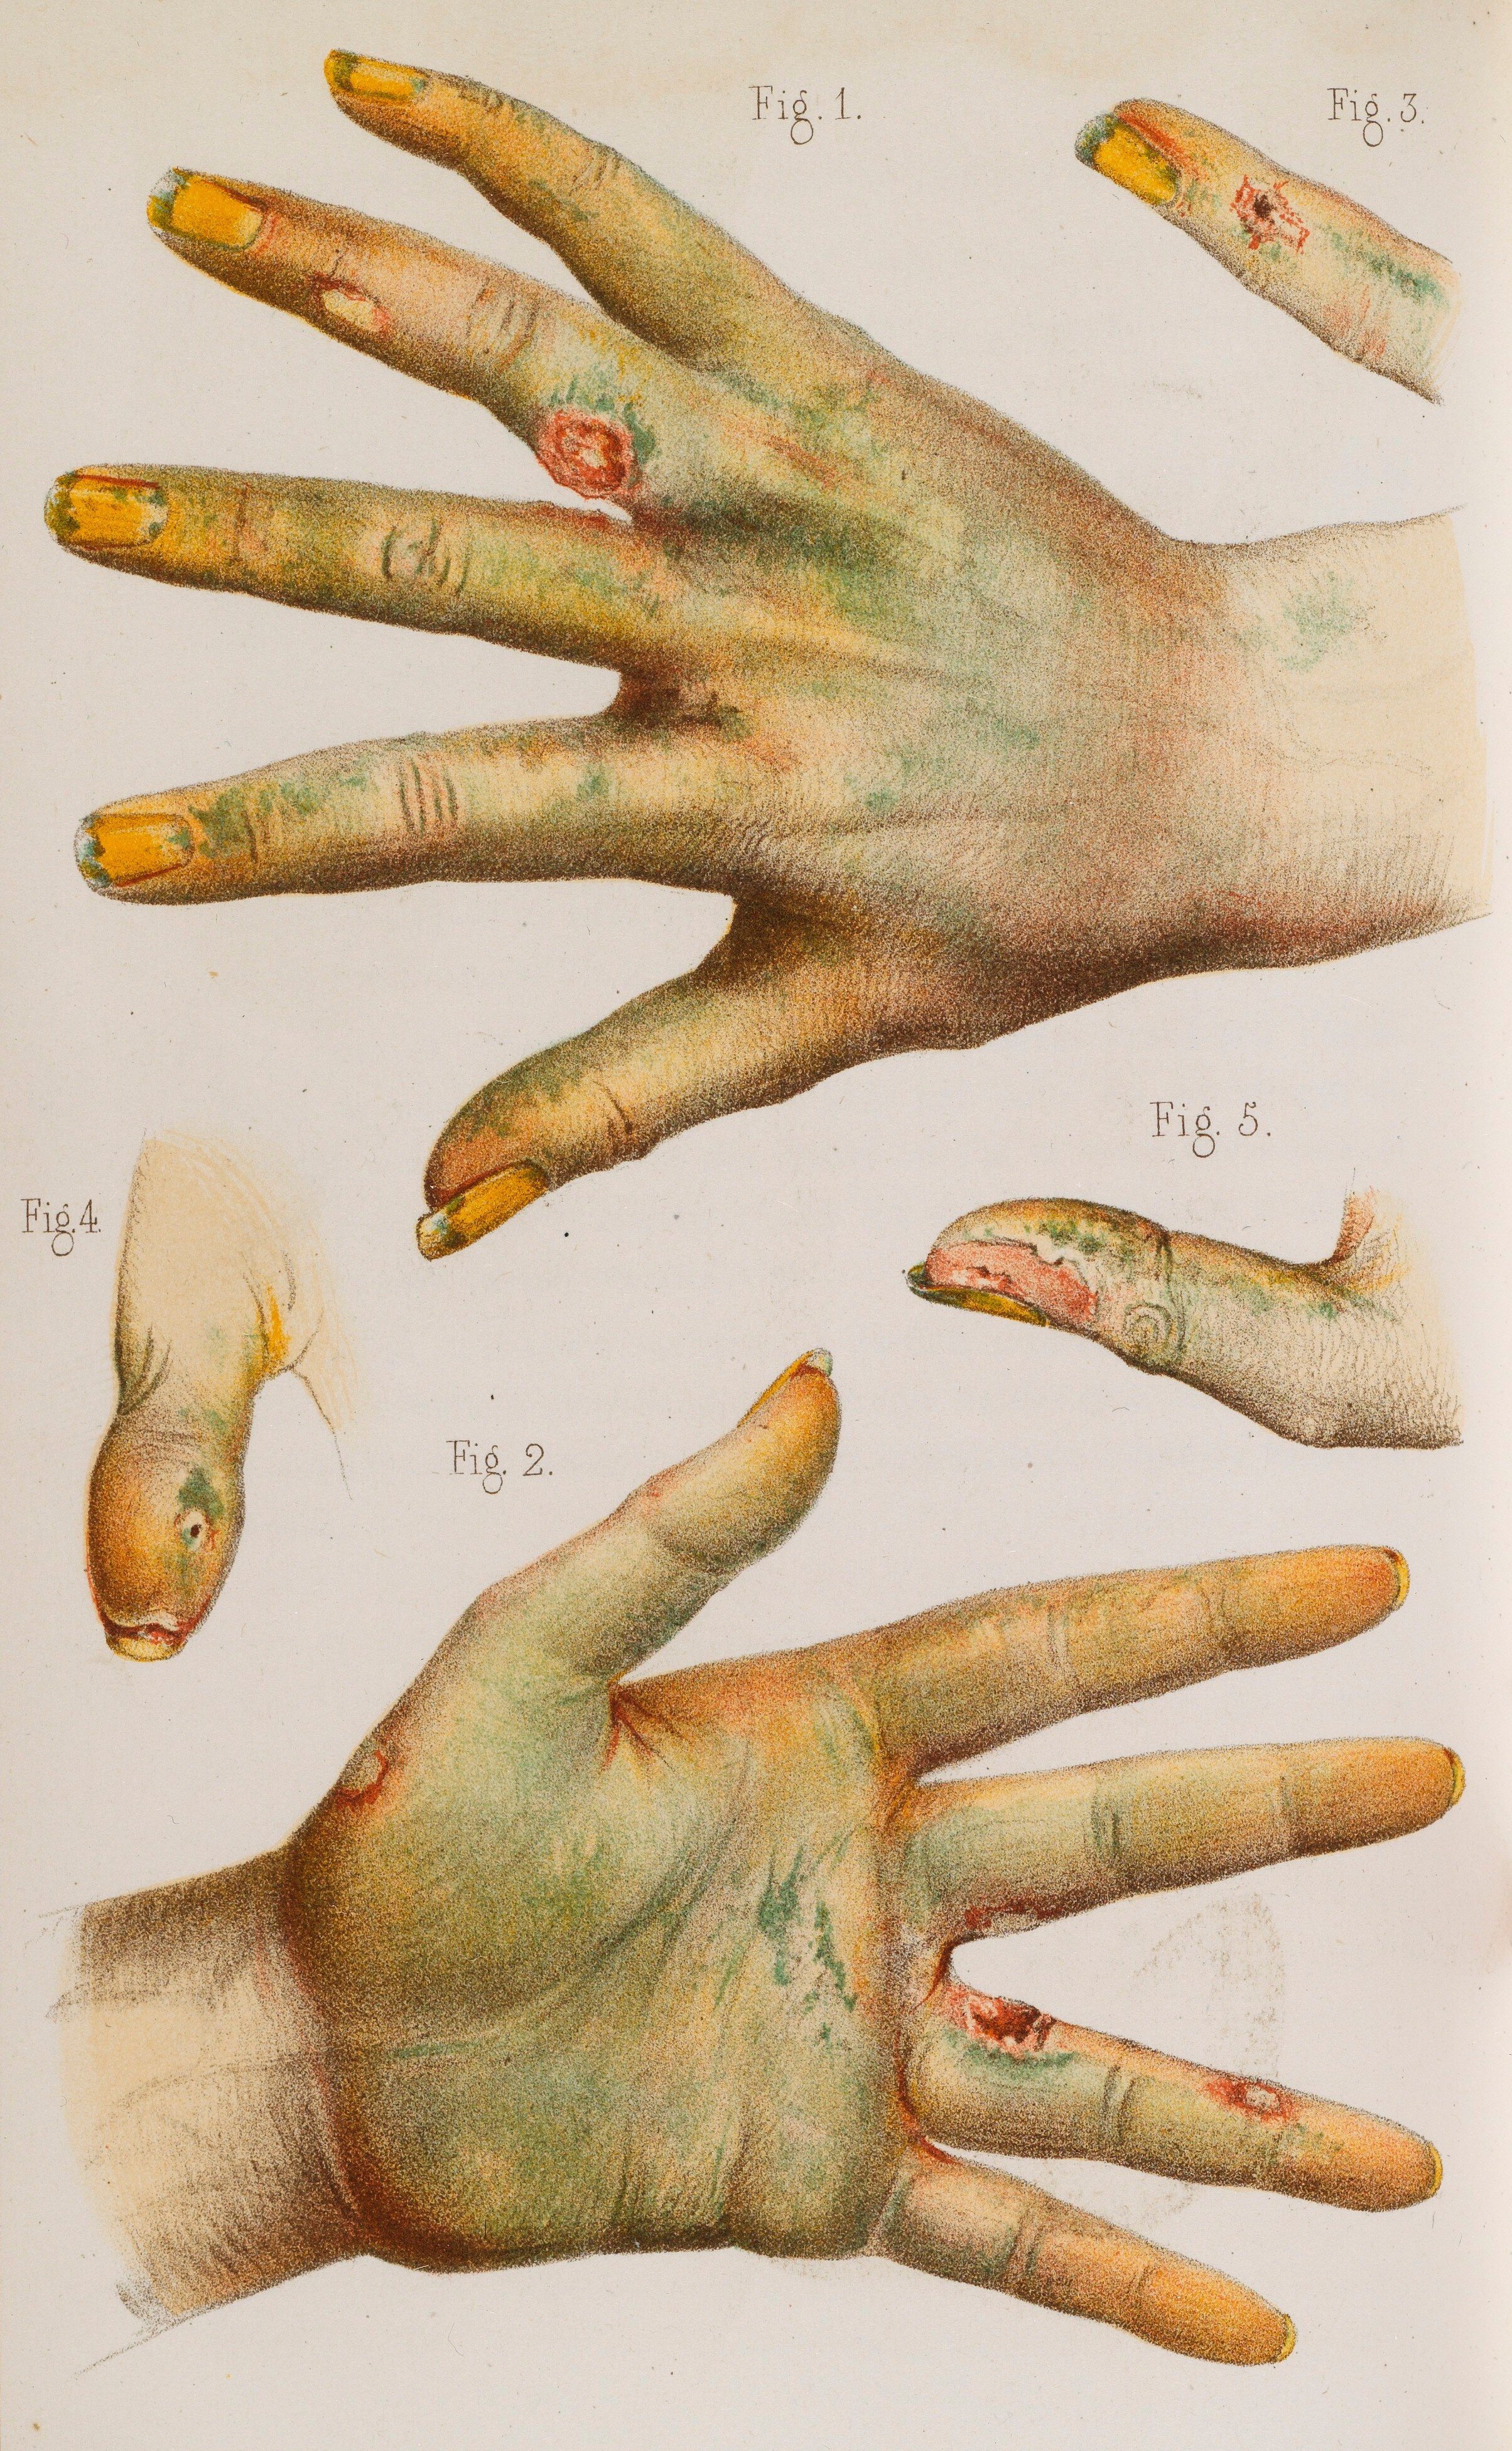 This illustration shows the kinds of wounds that artificial flower workers and other working with arsenical dyes experienced as a result of their dangerous work. Courtesy of the Wellcome Collection.